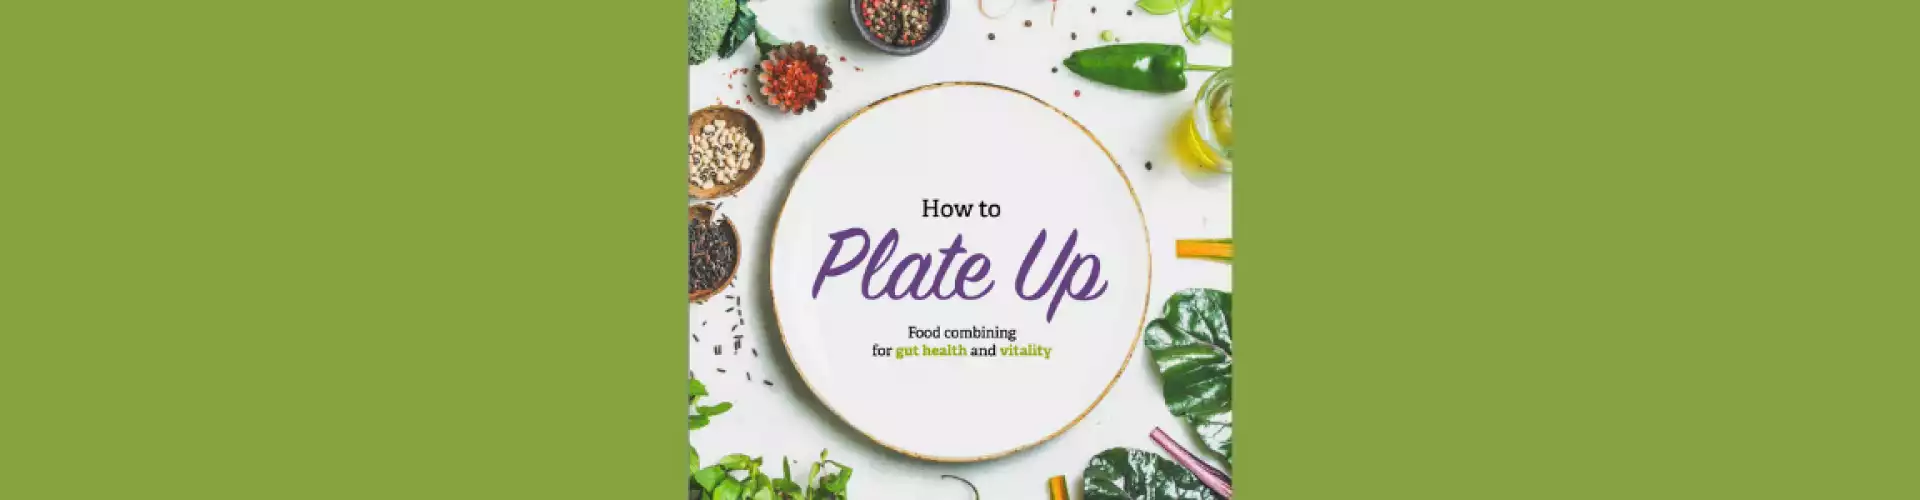 How to Plate Up Masterclass - Food Combining for Gut Health & Vitality